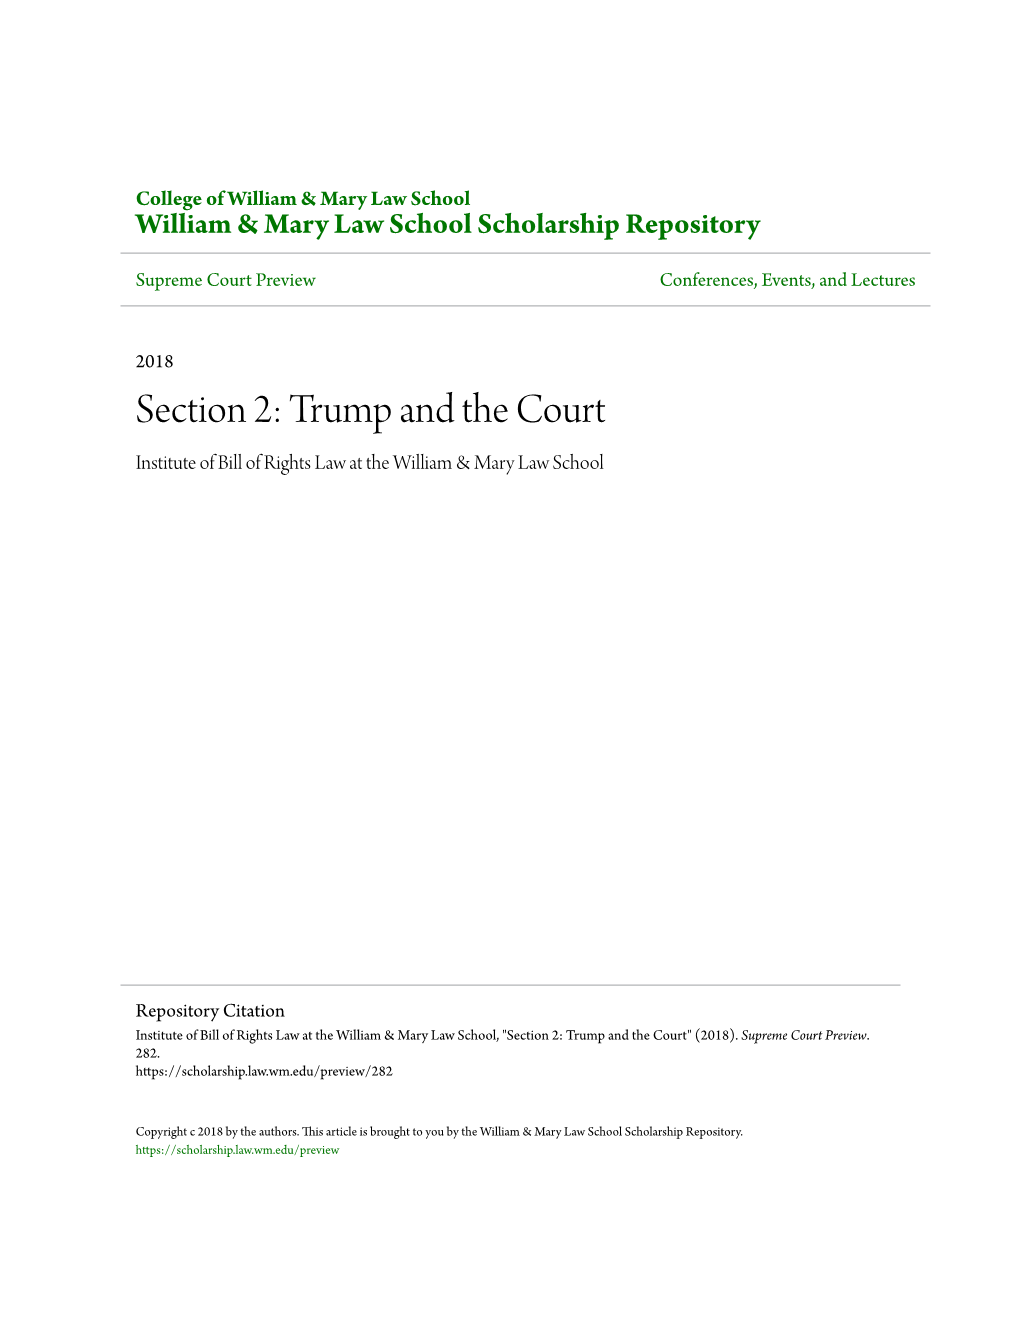 Trump and the Court Institute of Bill of Rights Law at the William & Mary Law School